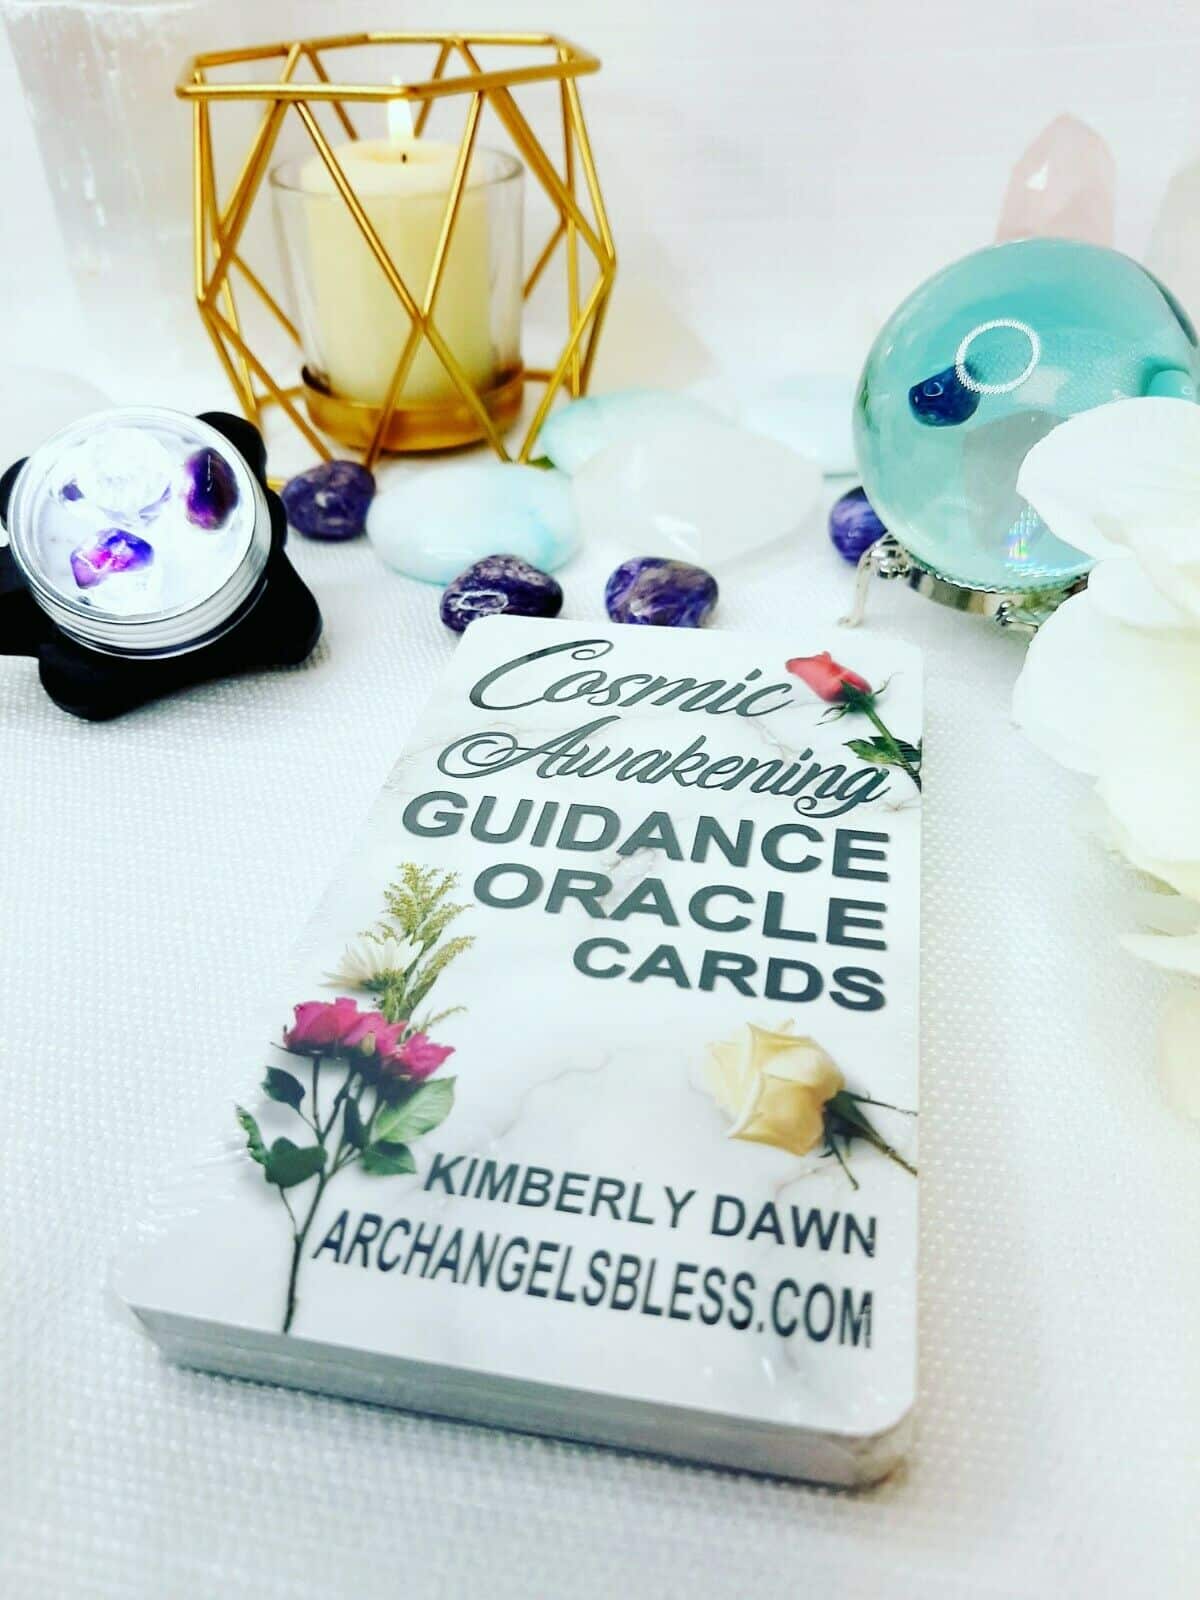 NEW Cosmic Awakening Guidance Oracle Cards [Blessed by the Archangels]